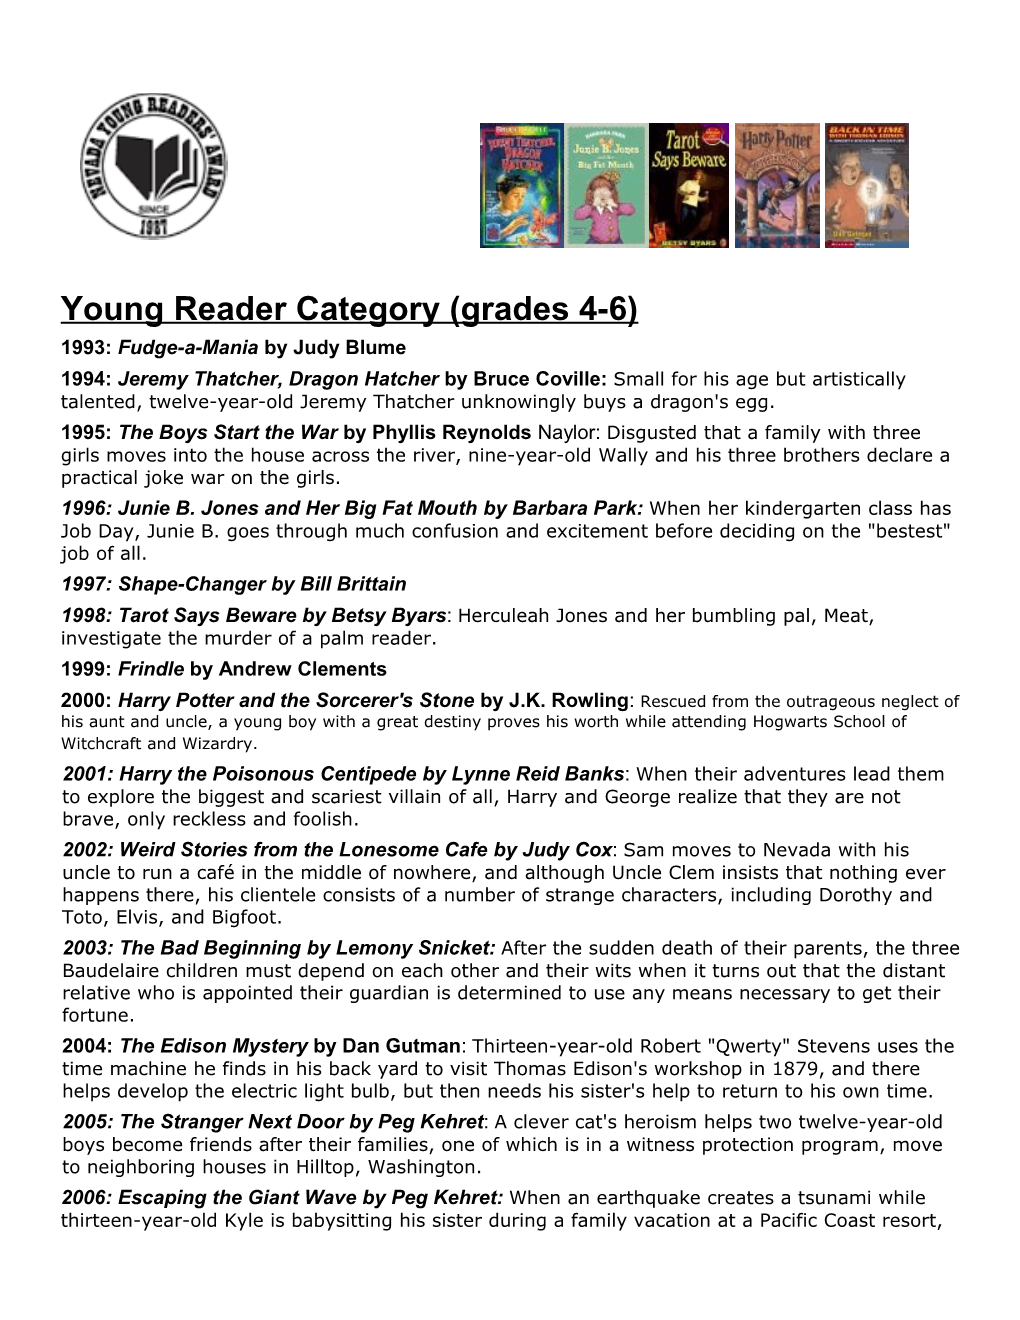 Young Reader Category (Grades 4-6)